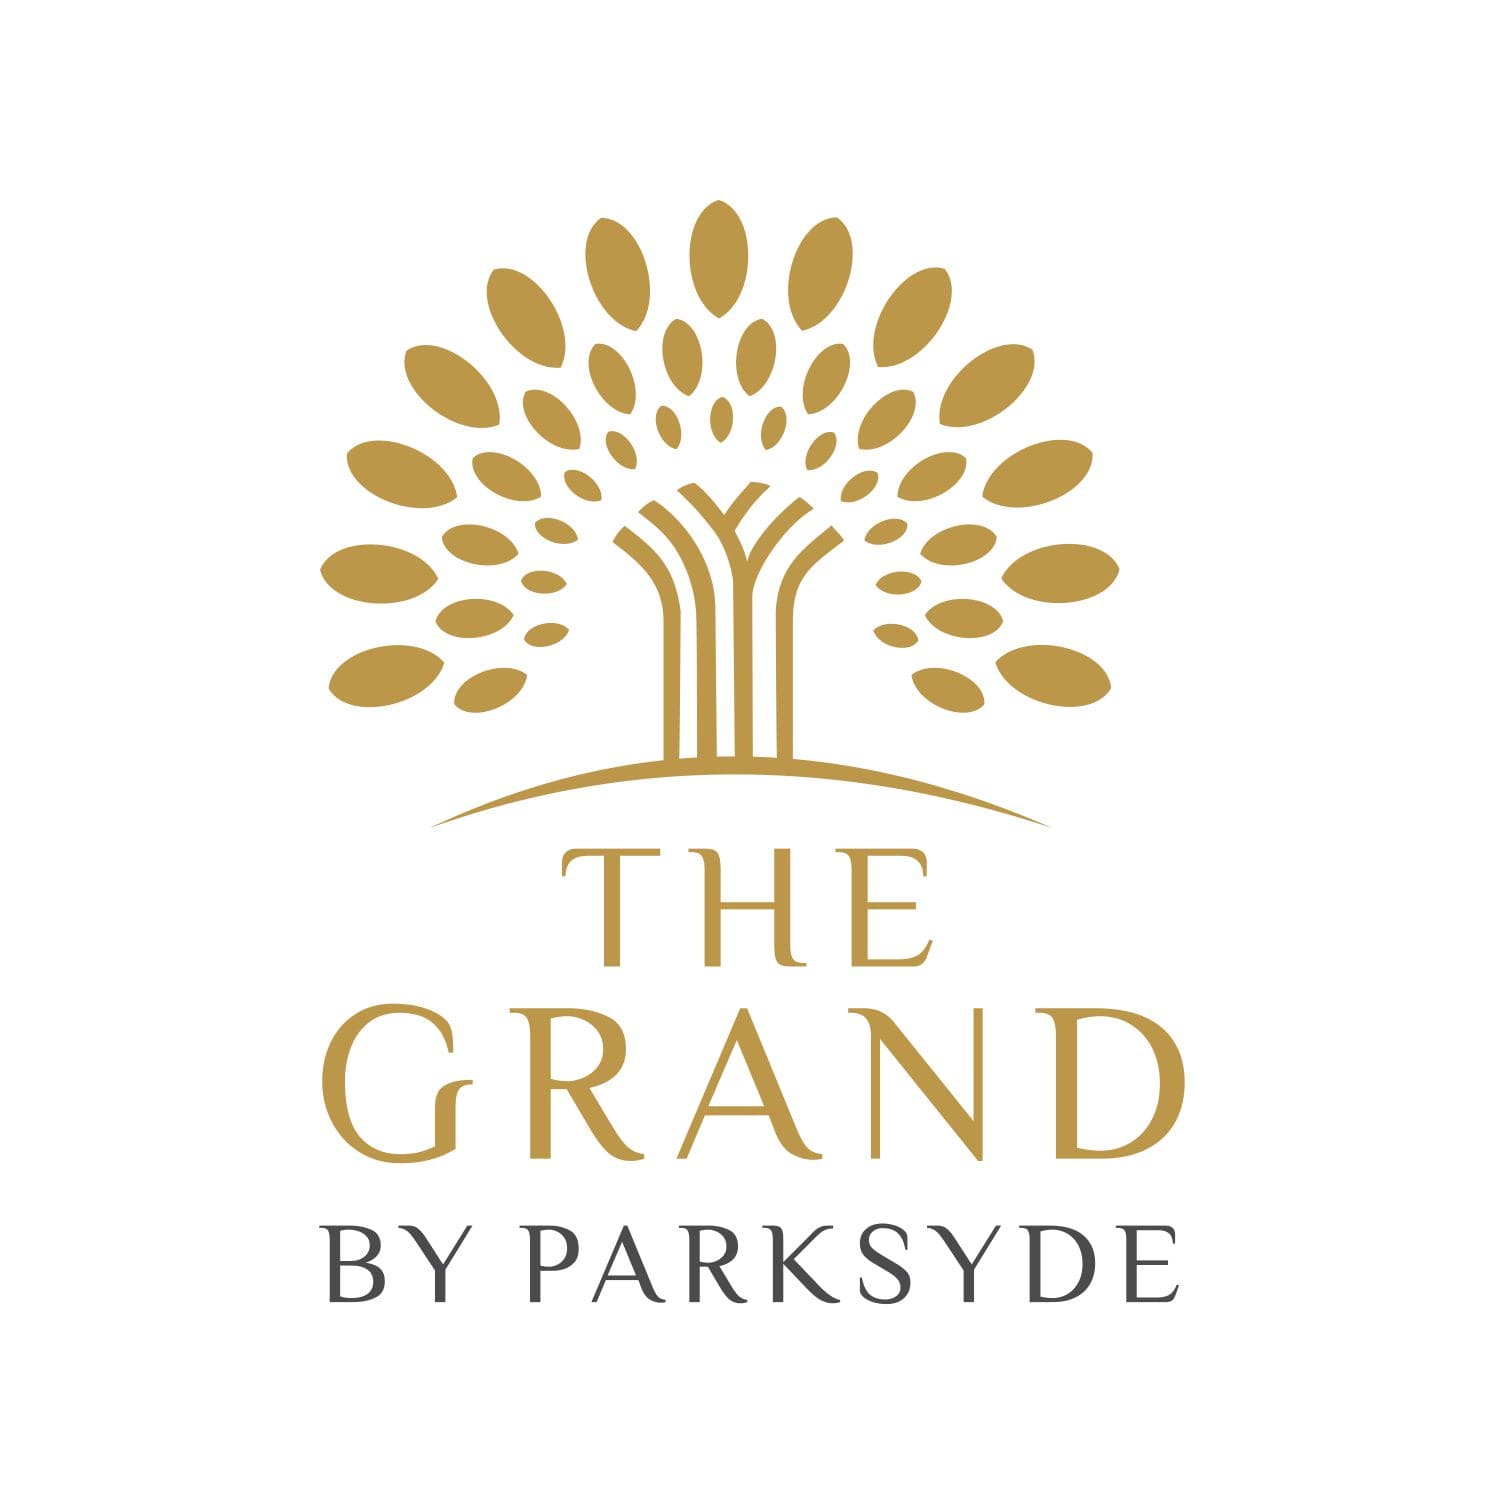 The Grand by Parksyde